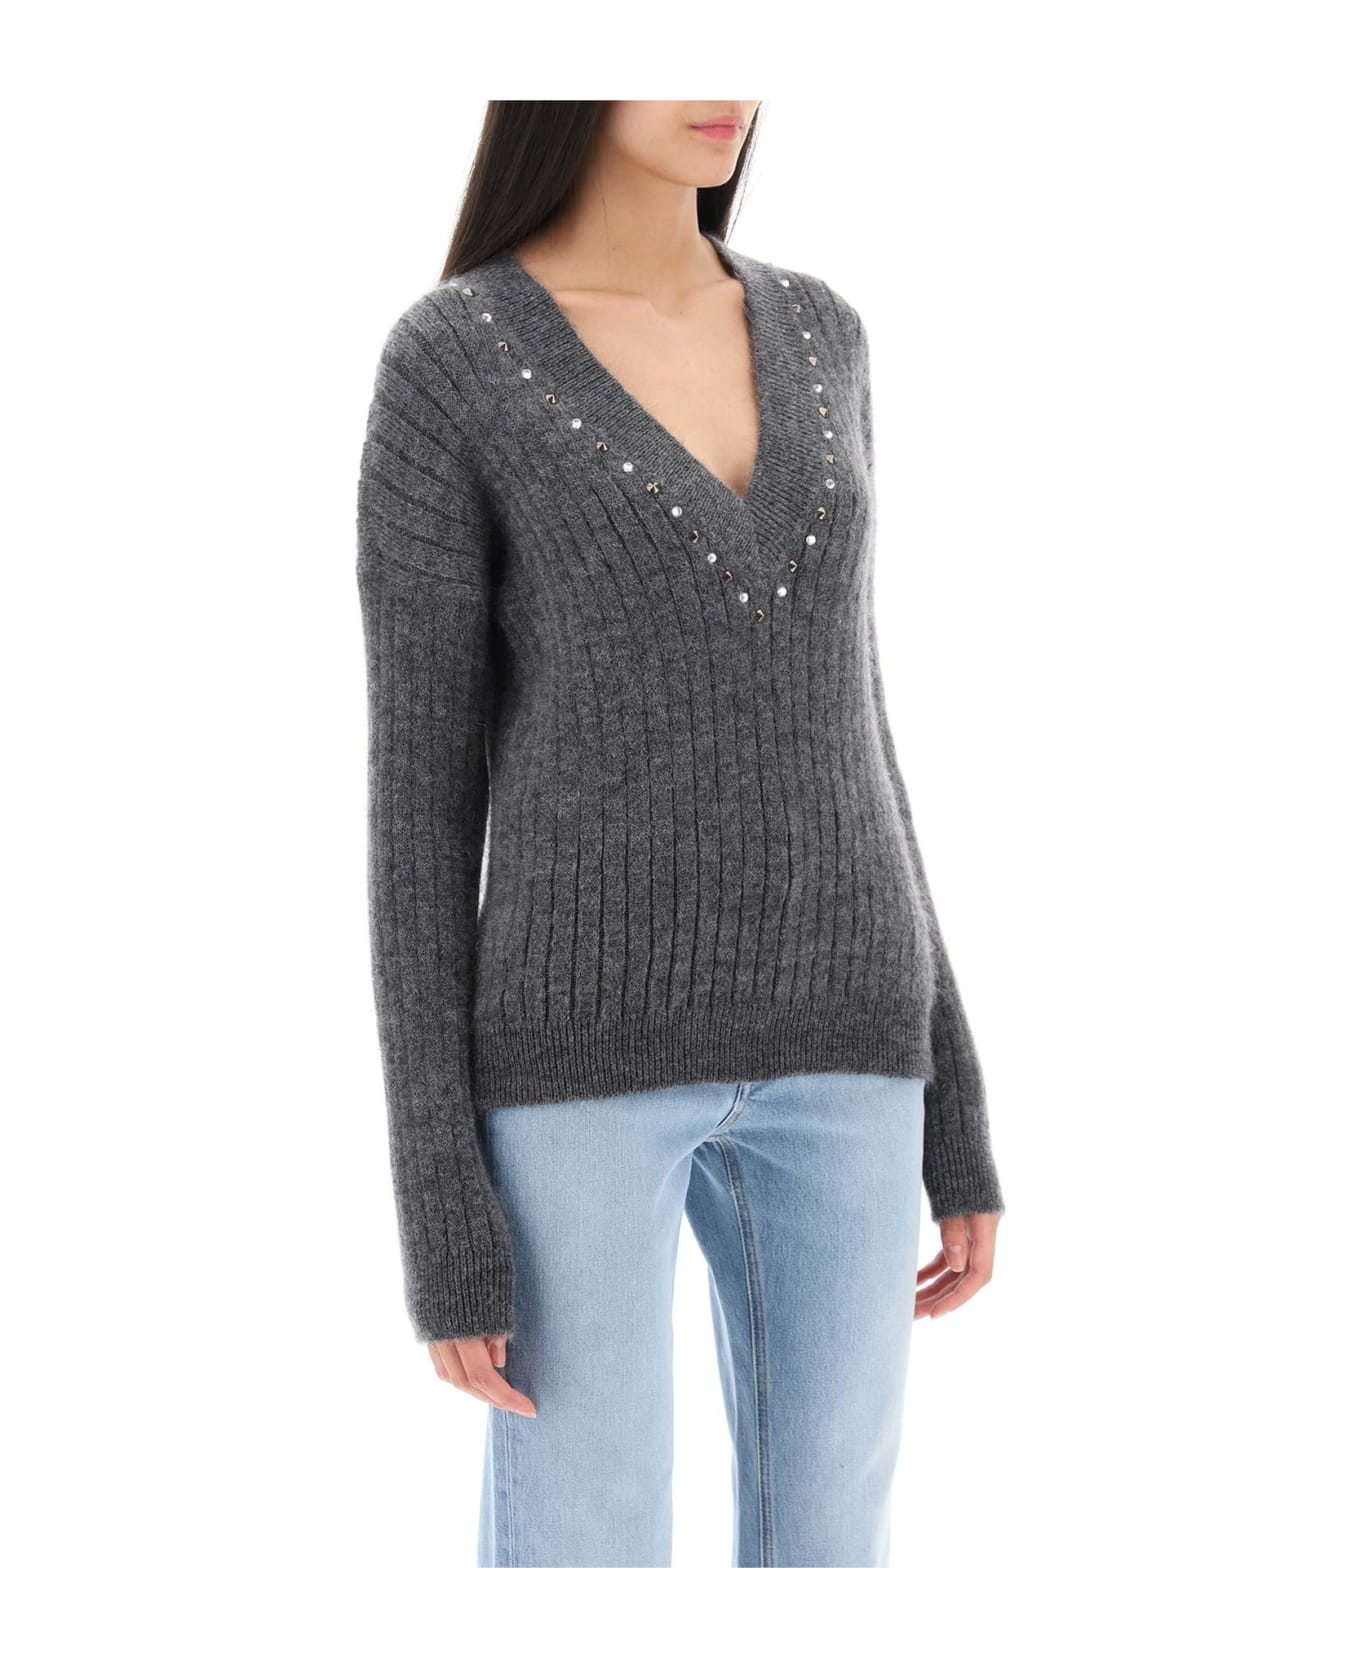 Alessandra Rich Wool Knit Sweater With Studs And Crystals - GREY MELANGE (Grey) ニットウェア